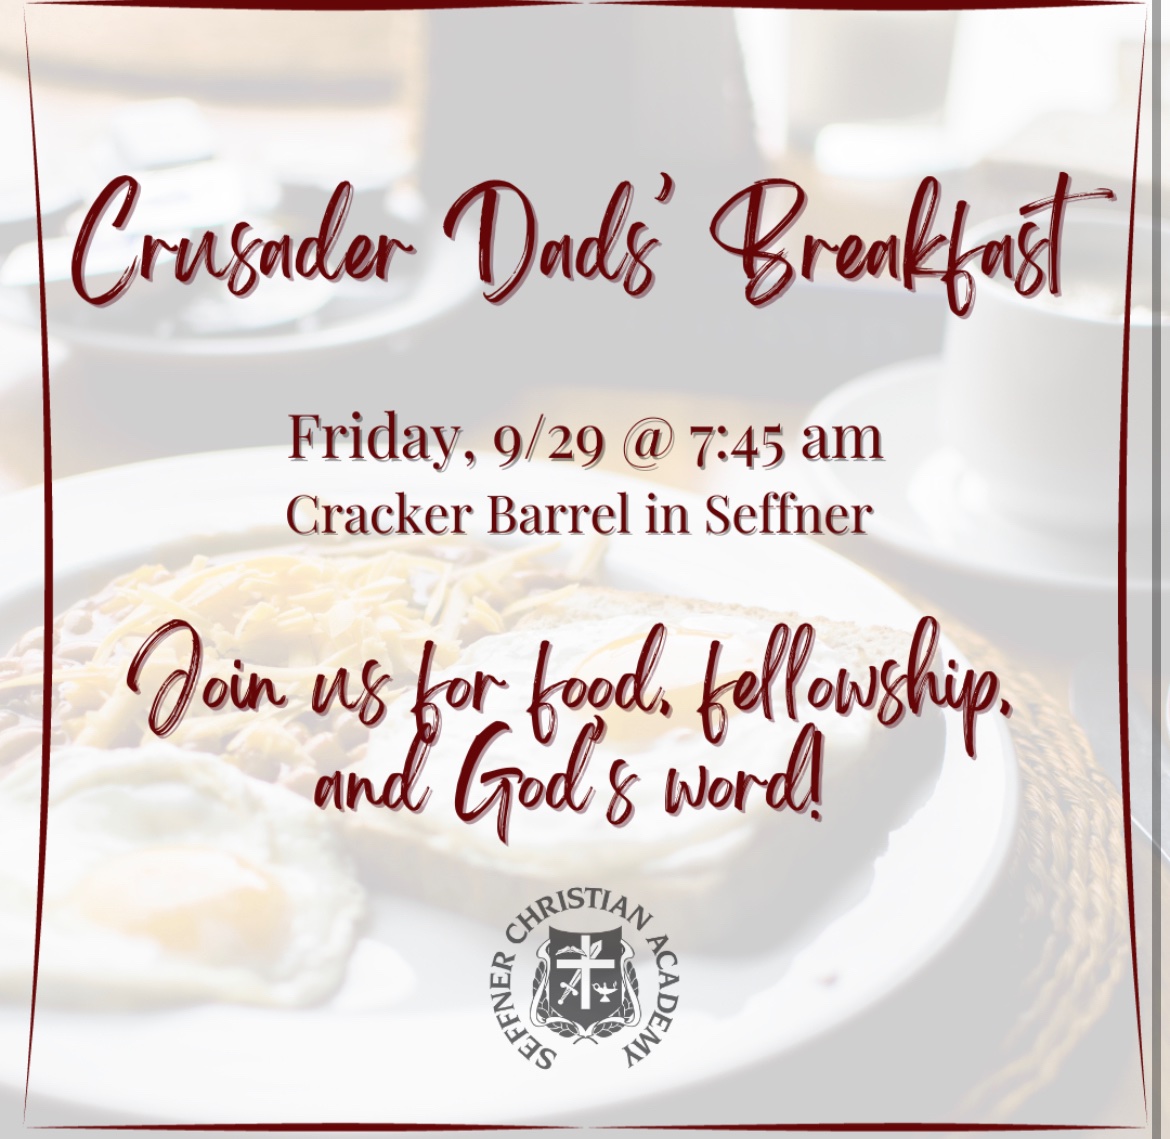 Hey Dad’s, Join Mr. Duncan tomorrow at Cracker Barrel for the “Crusader Dad’s Breakfast”. This will be a monthly event of food and fellowship. Plan ahead: 9/29. 10/27. 11/17. 12/15. 1/26. 2/23. 3/22. 4/26. 5/17.